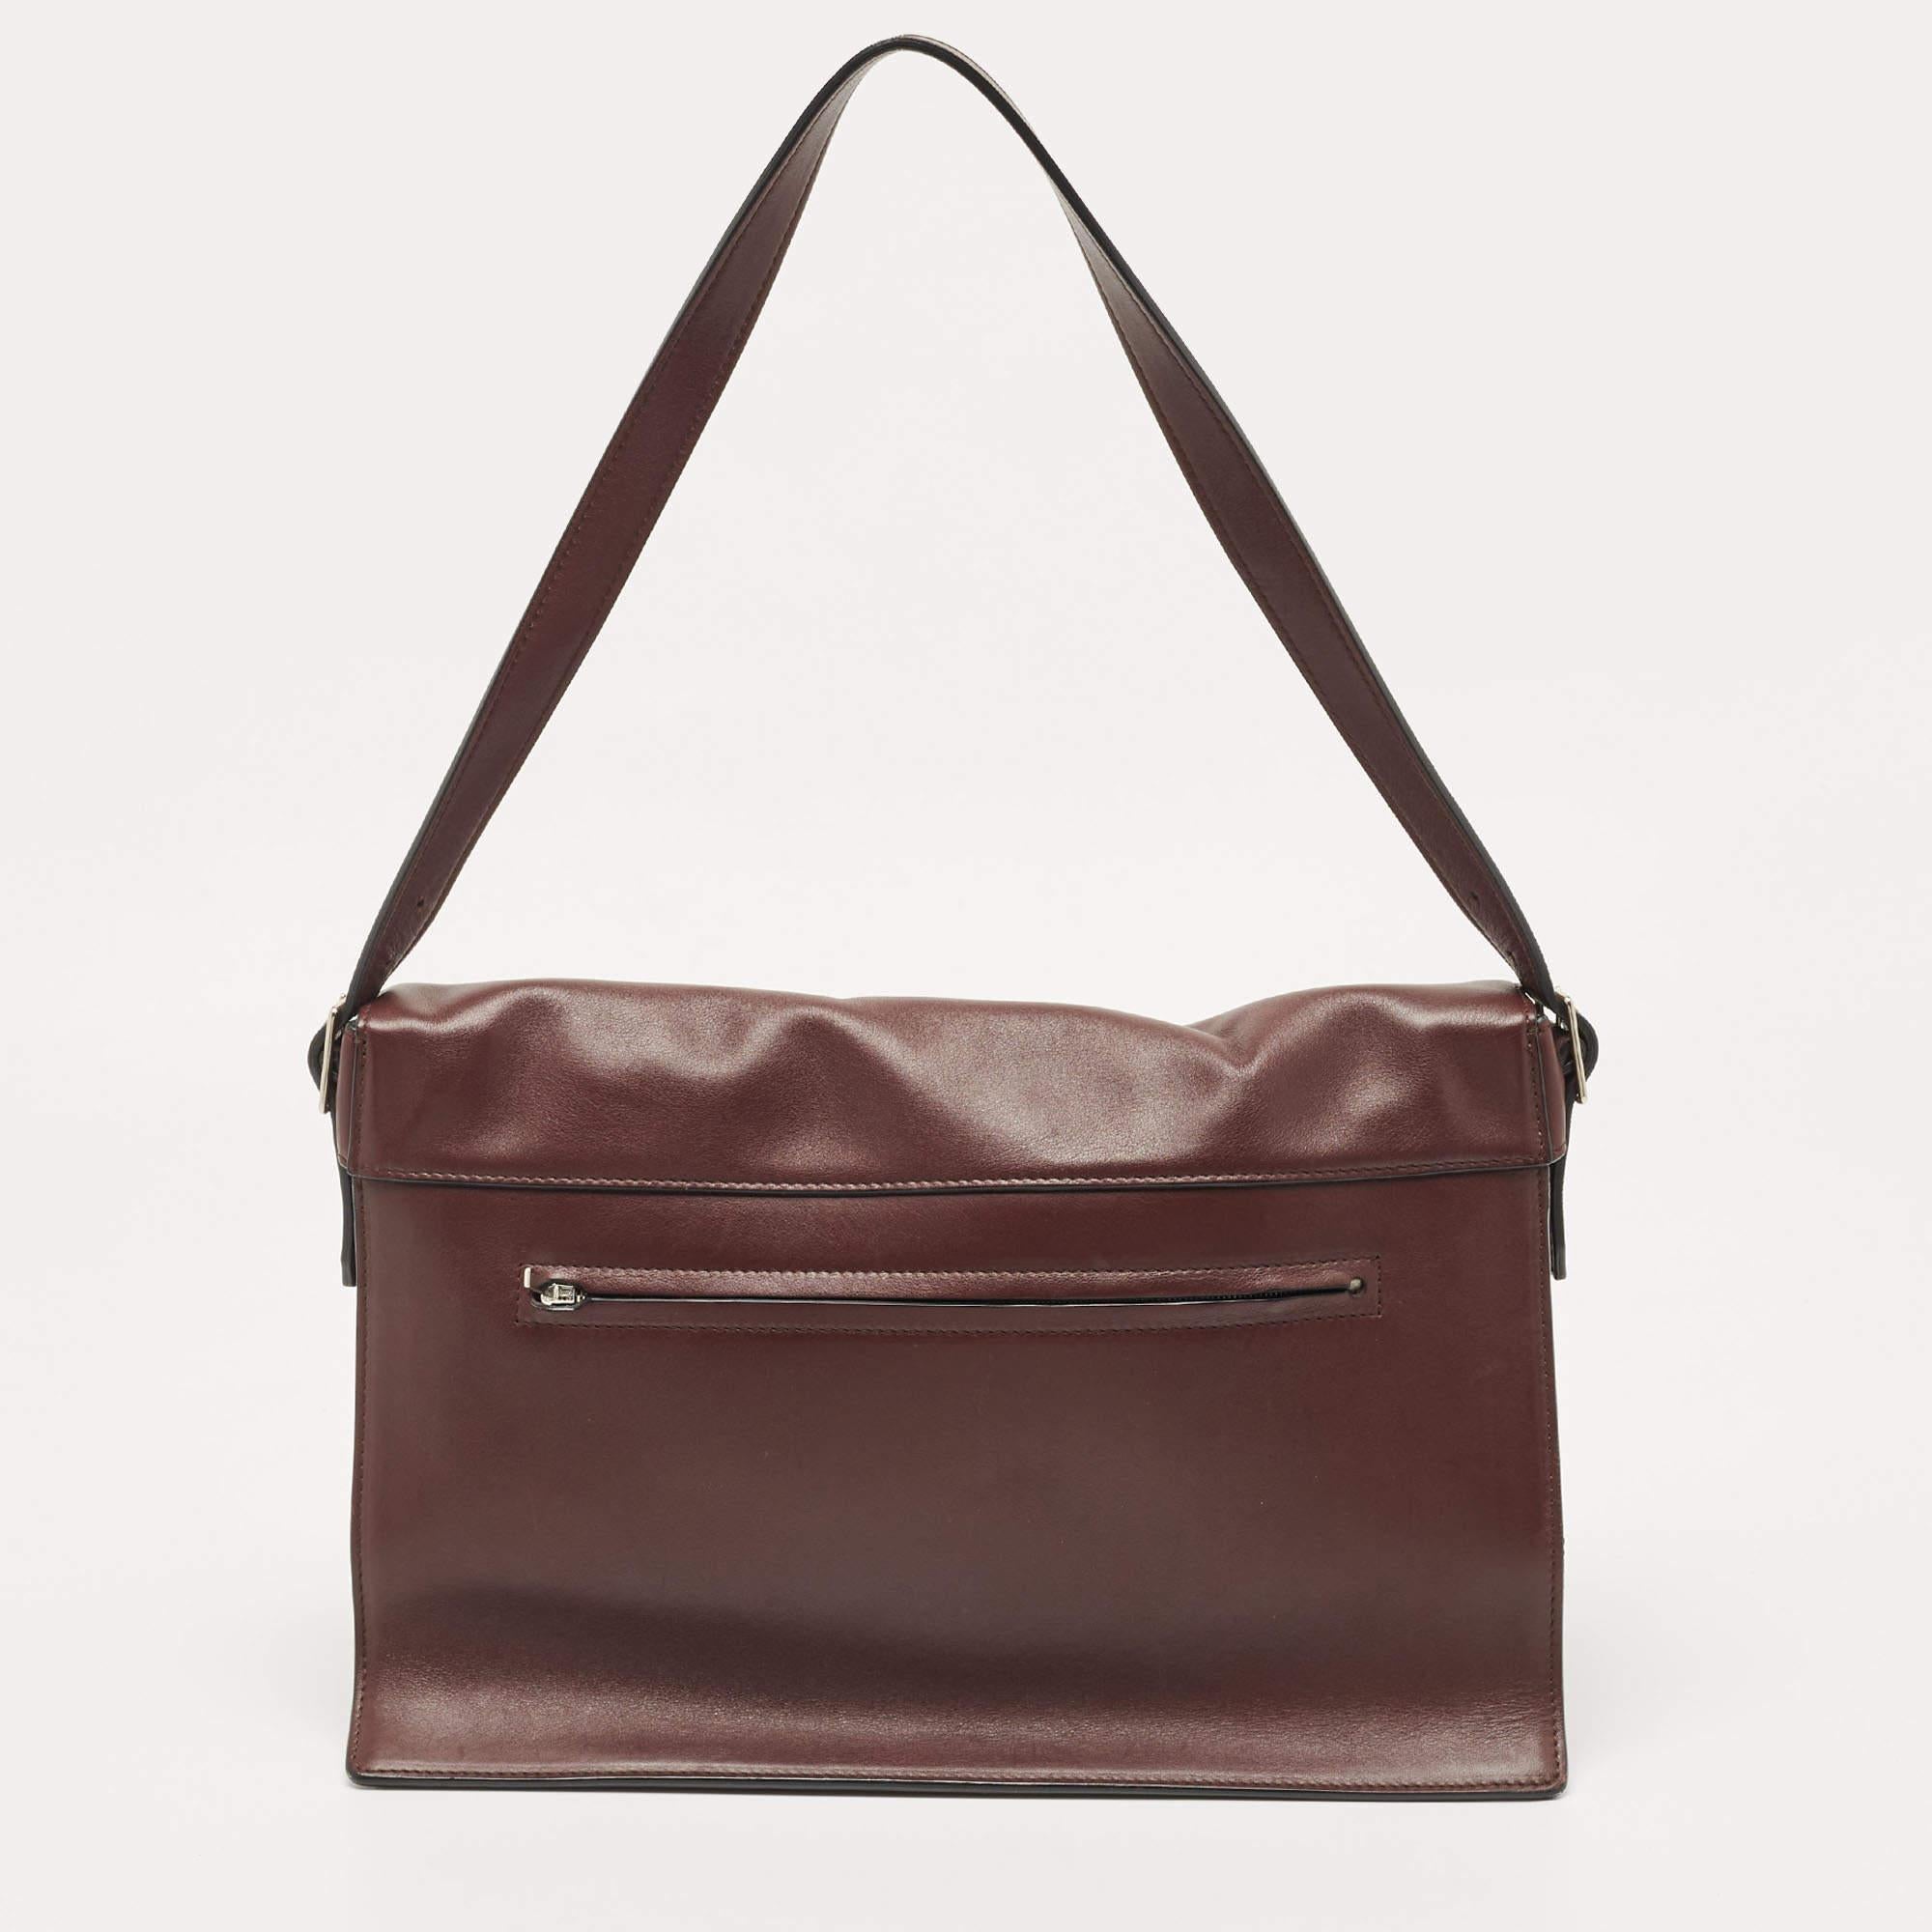 Crafted in burgundy leather and suede, this beautiful Diamond shoulder bag from Celine is easy to carry with casuals or formals. The envelope front flap opens with a silver-tone lock closure to a leather-lined interior with different compartments to